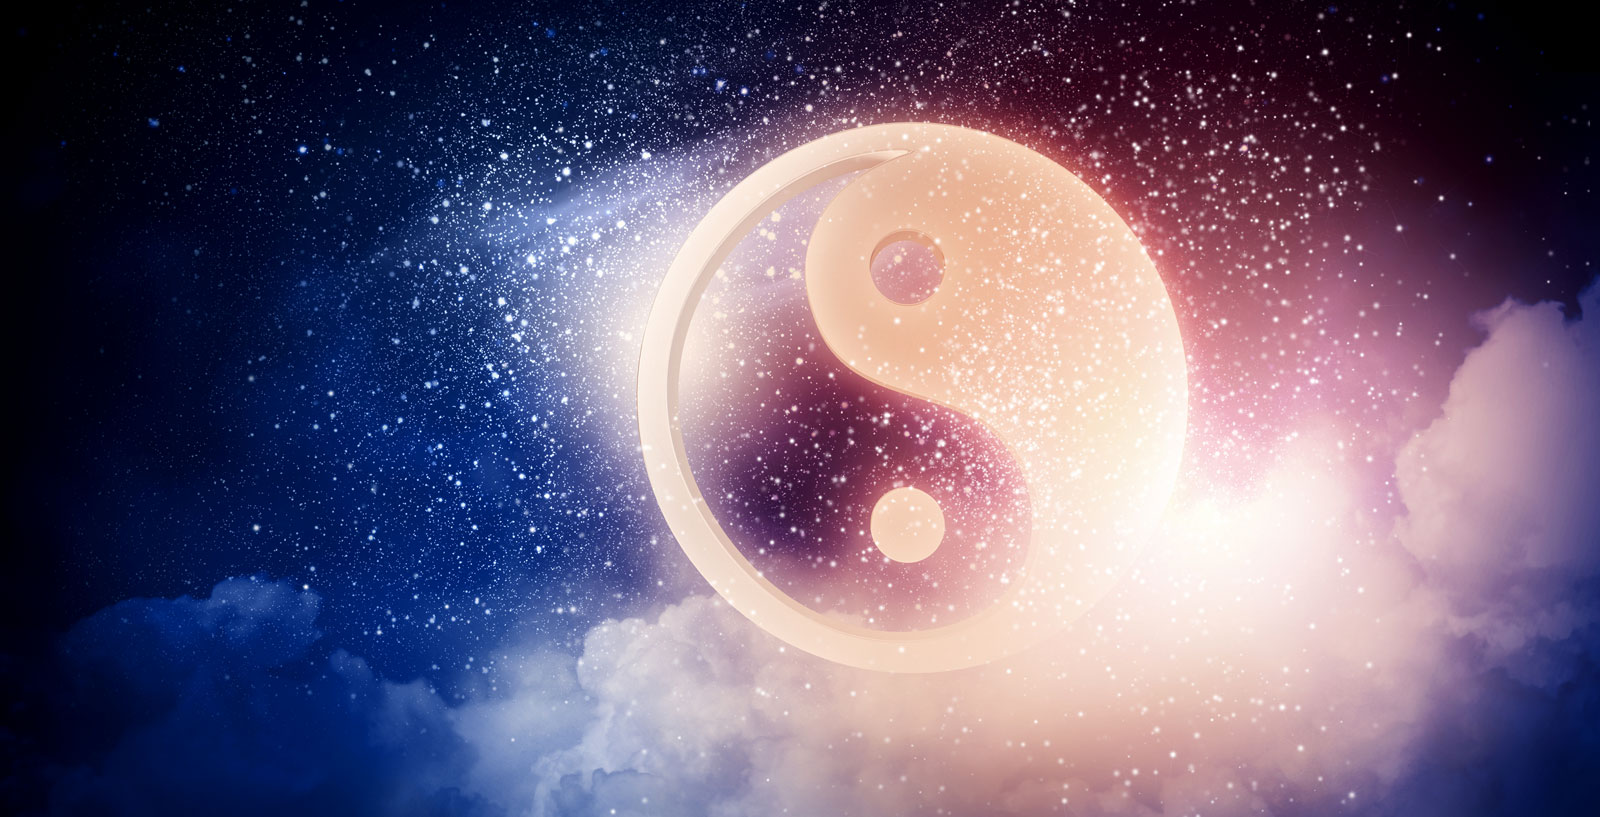 Yin Yang Symbols And Meaning On Whats Your Sign